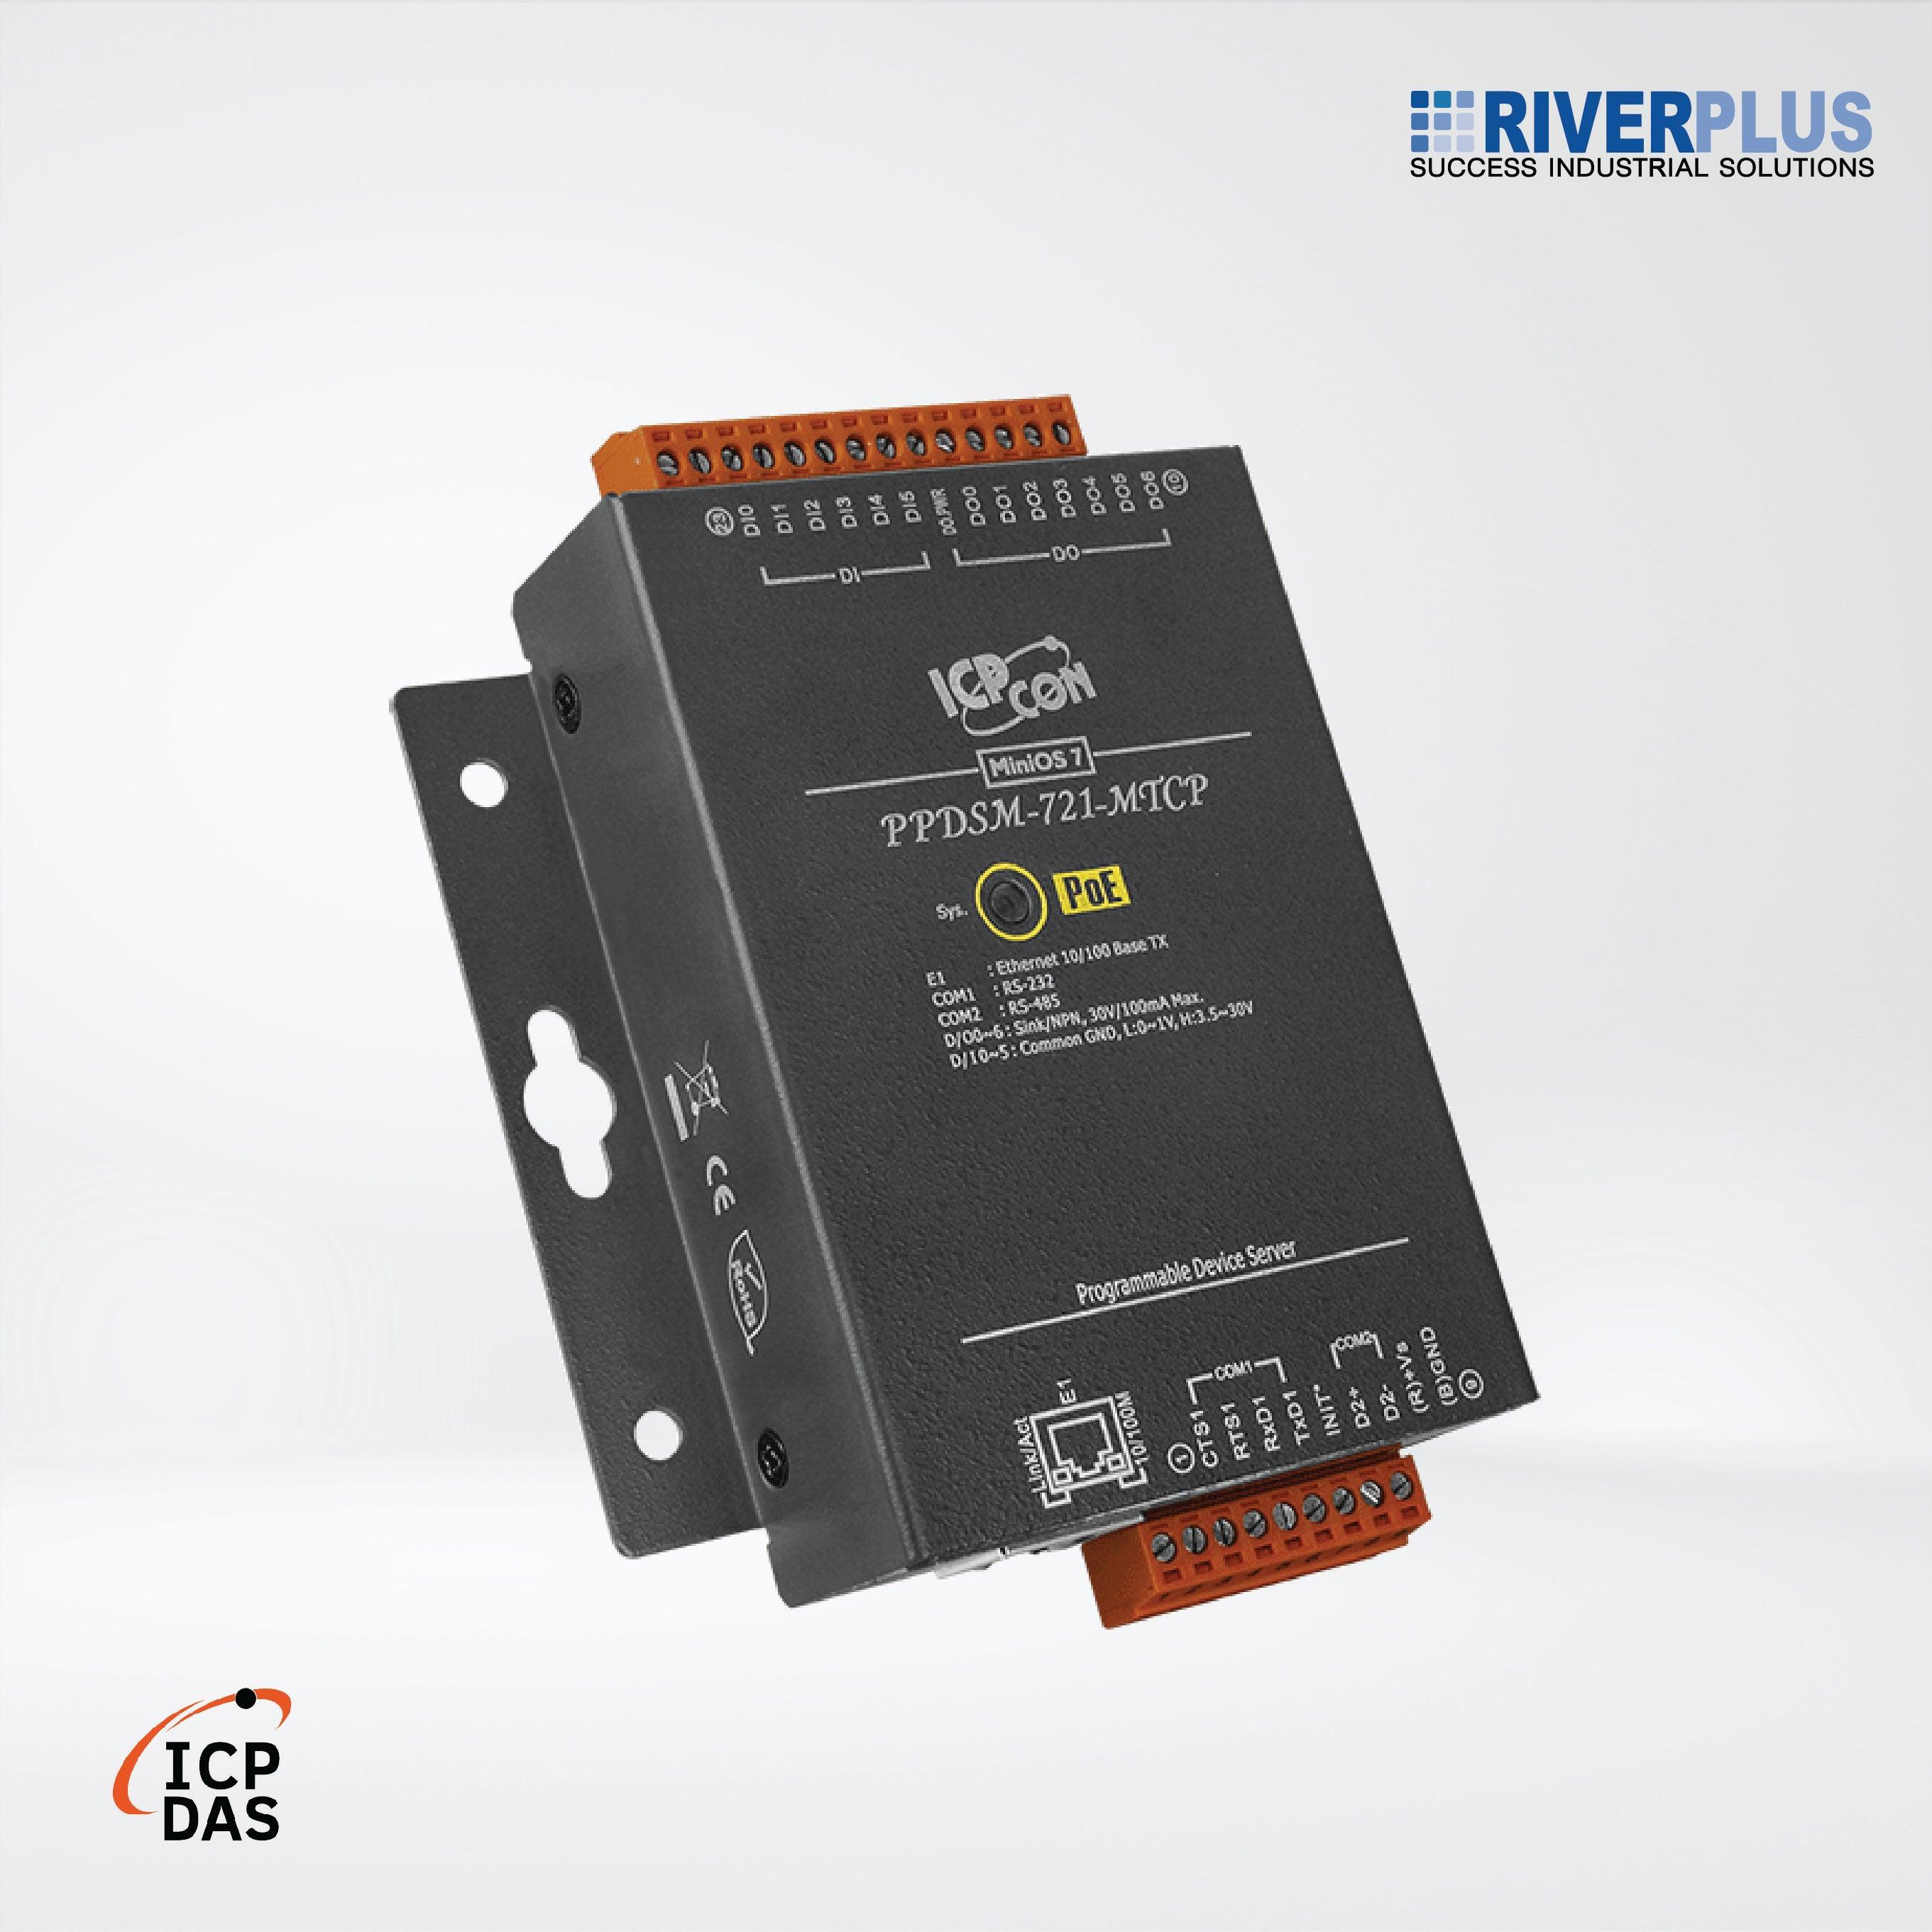 PPDSM-721-MTCP Programmable (1x RS-232 and 1x RS-485) Serial-to-Ethernet Device Server - Riverplus